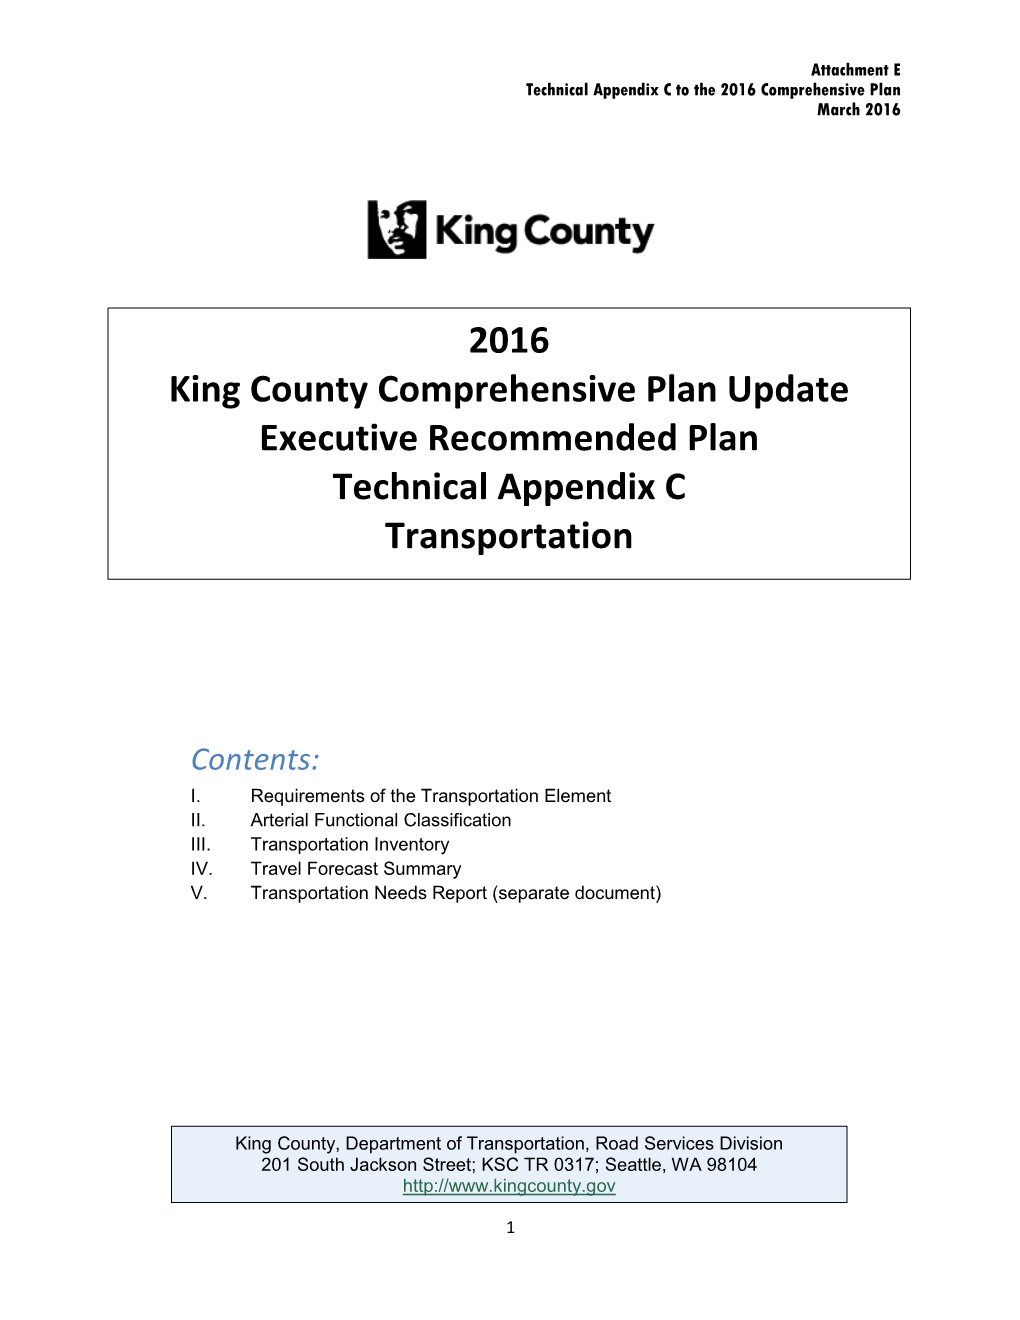 2016 King County Comprehensive Plan Update Executive Recommended Plan Technical Appendix C Transportation